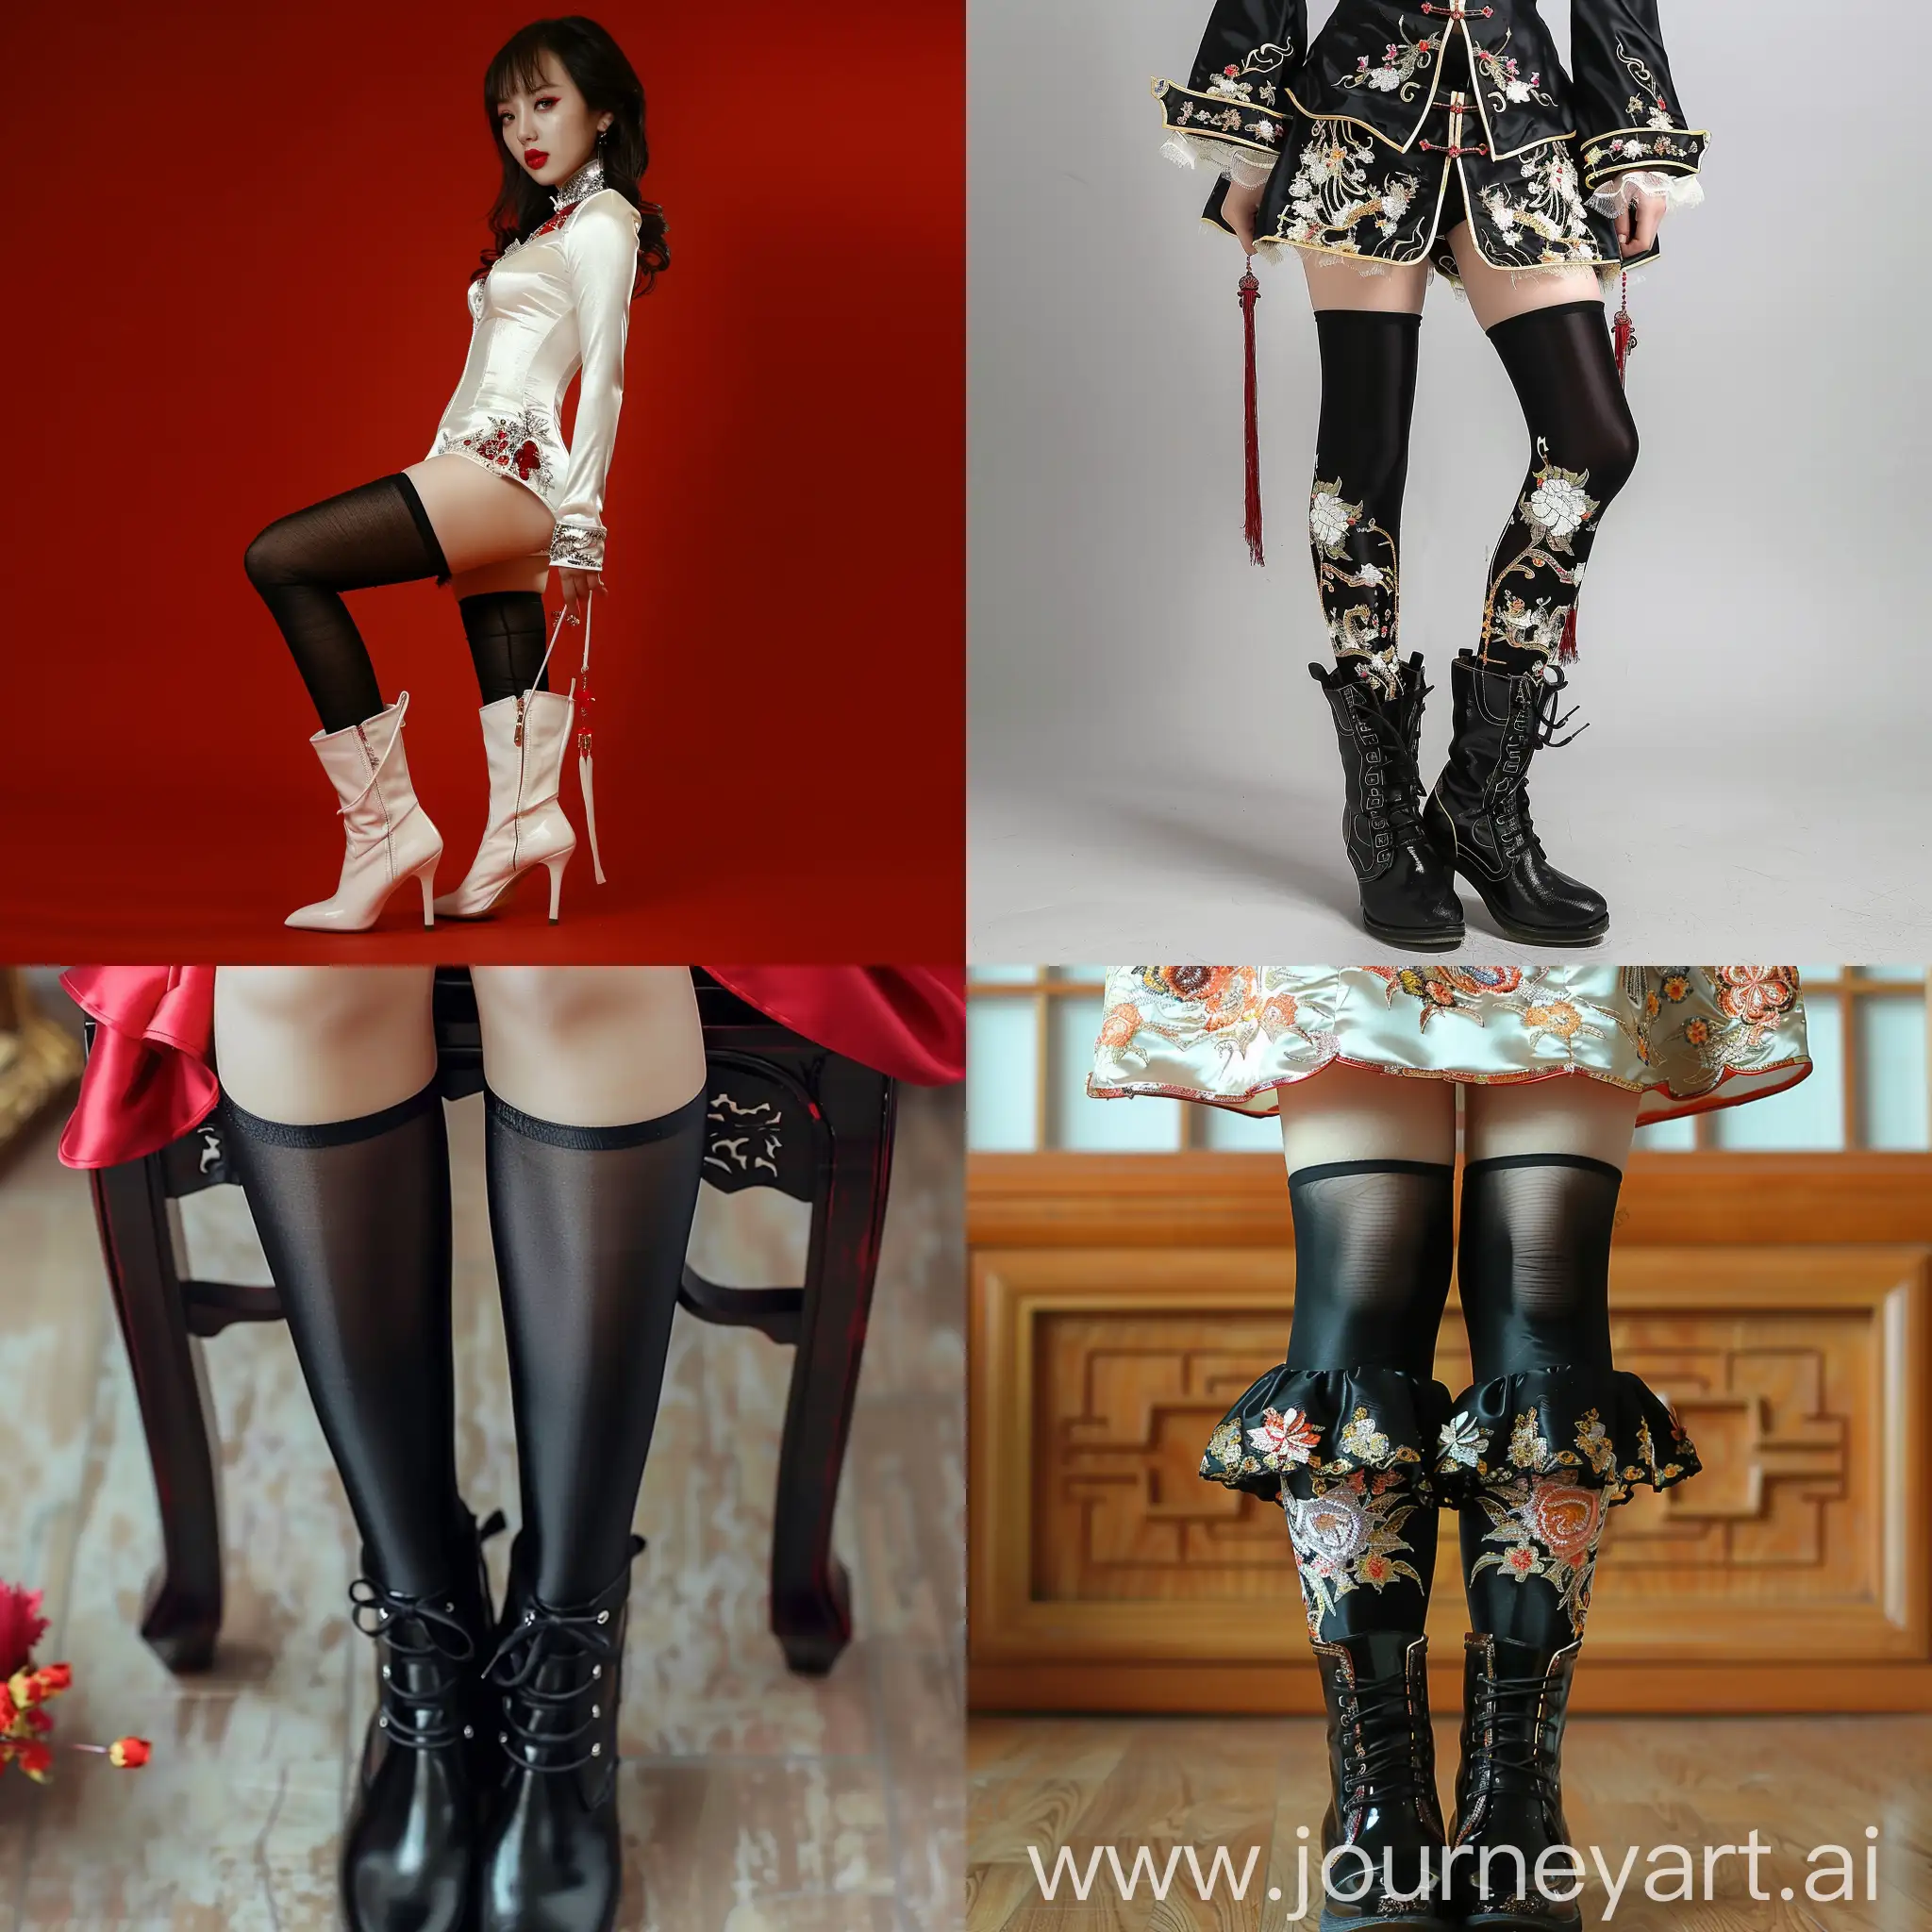 Chinese-Women-in-High-Boots-and-Black-Silk-Stockings